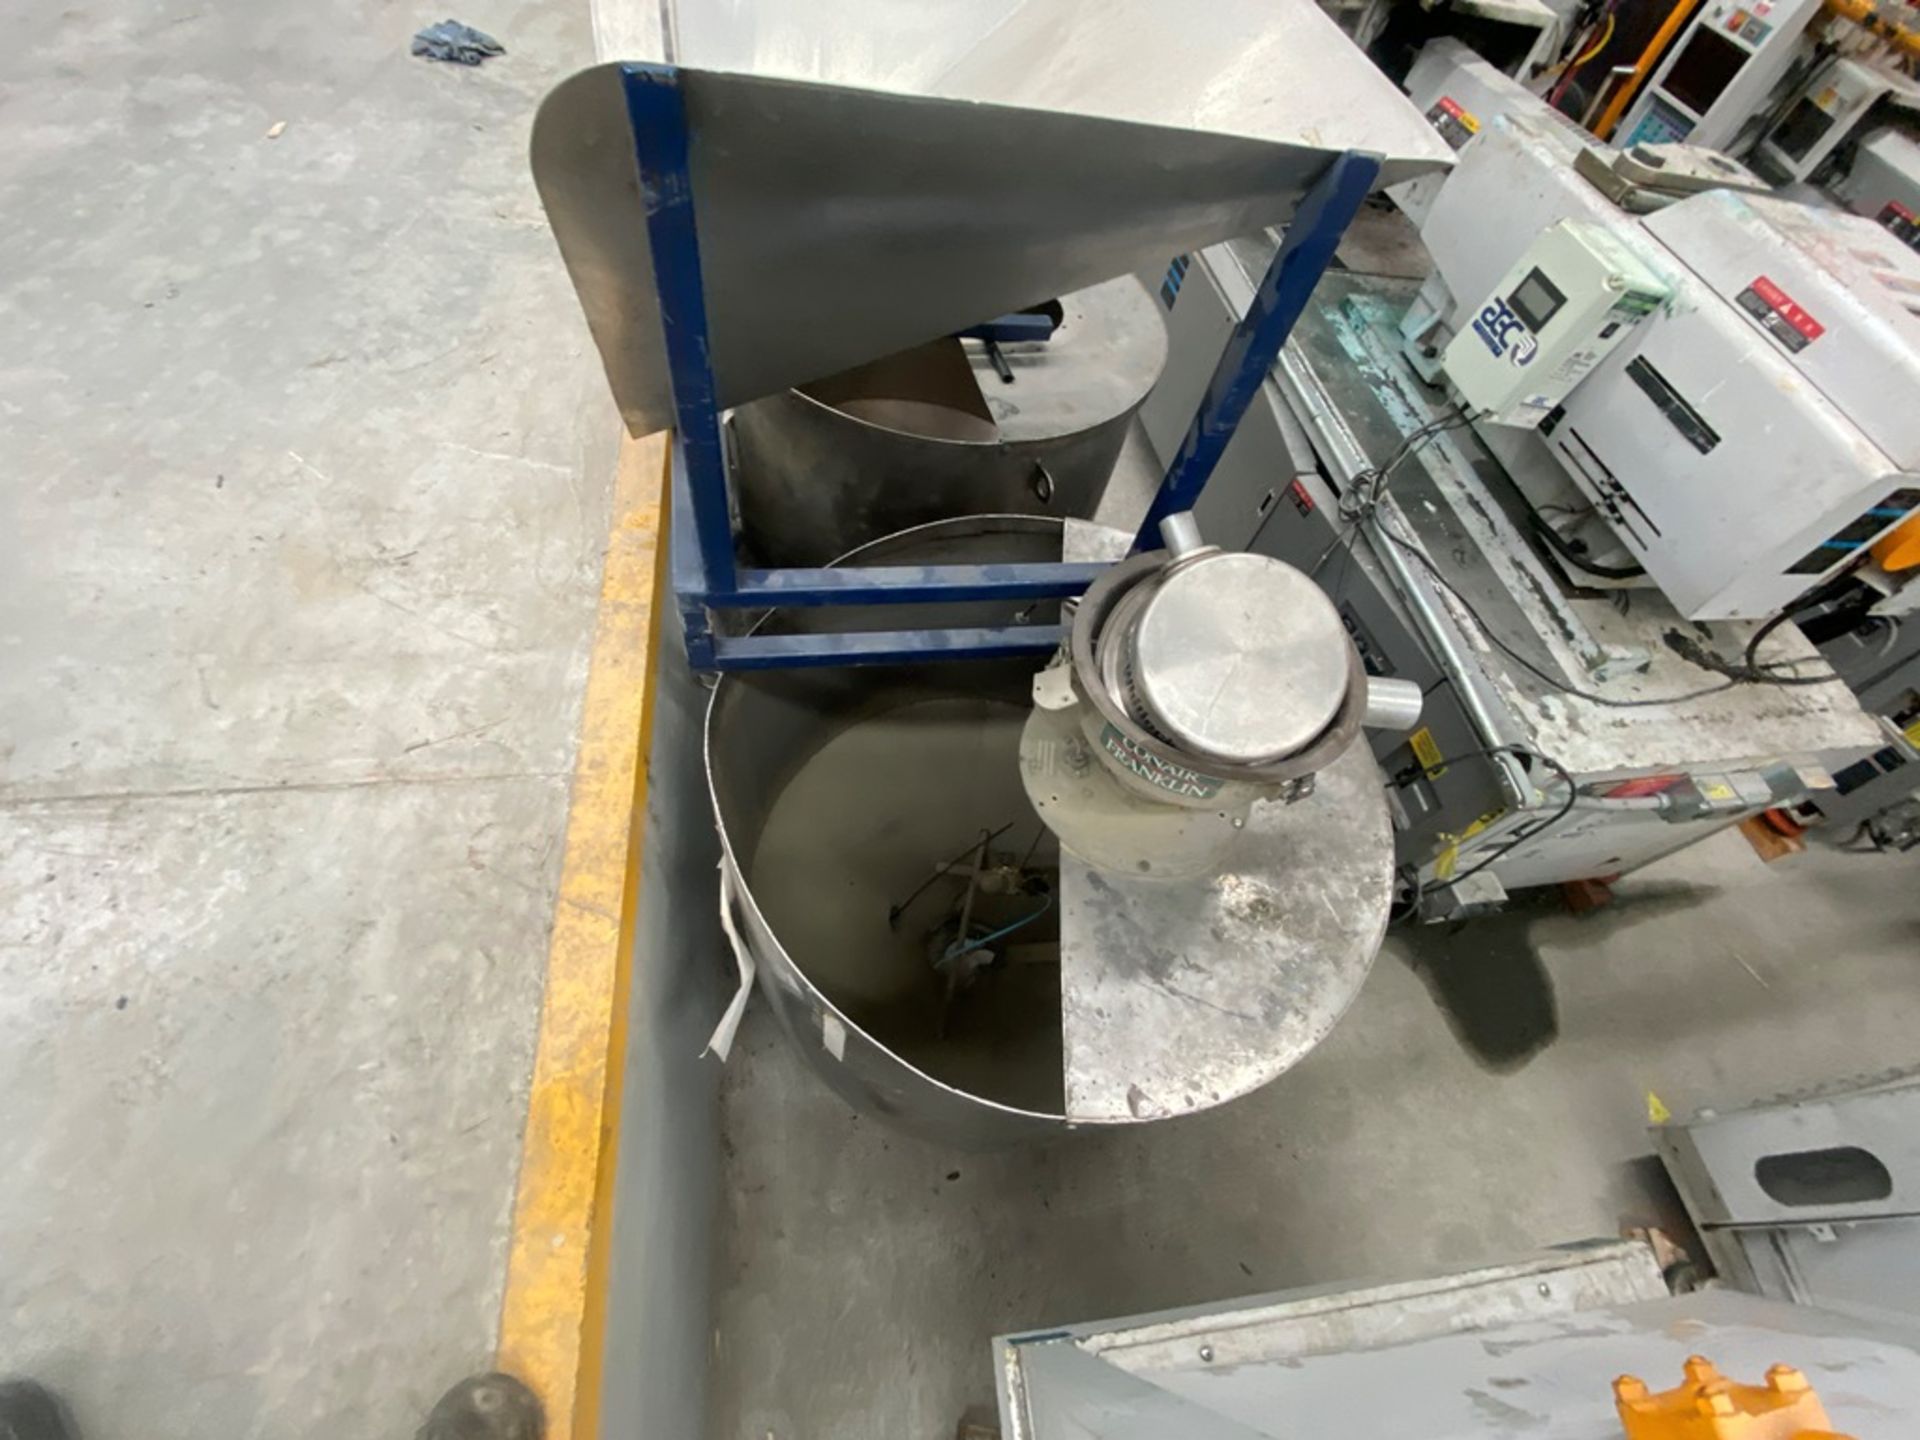 Helical stainless steel conveyor, 1 Hydraulic Piston, 2 Hoppers for stainless steel feeder - Image 12 of 37